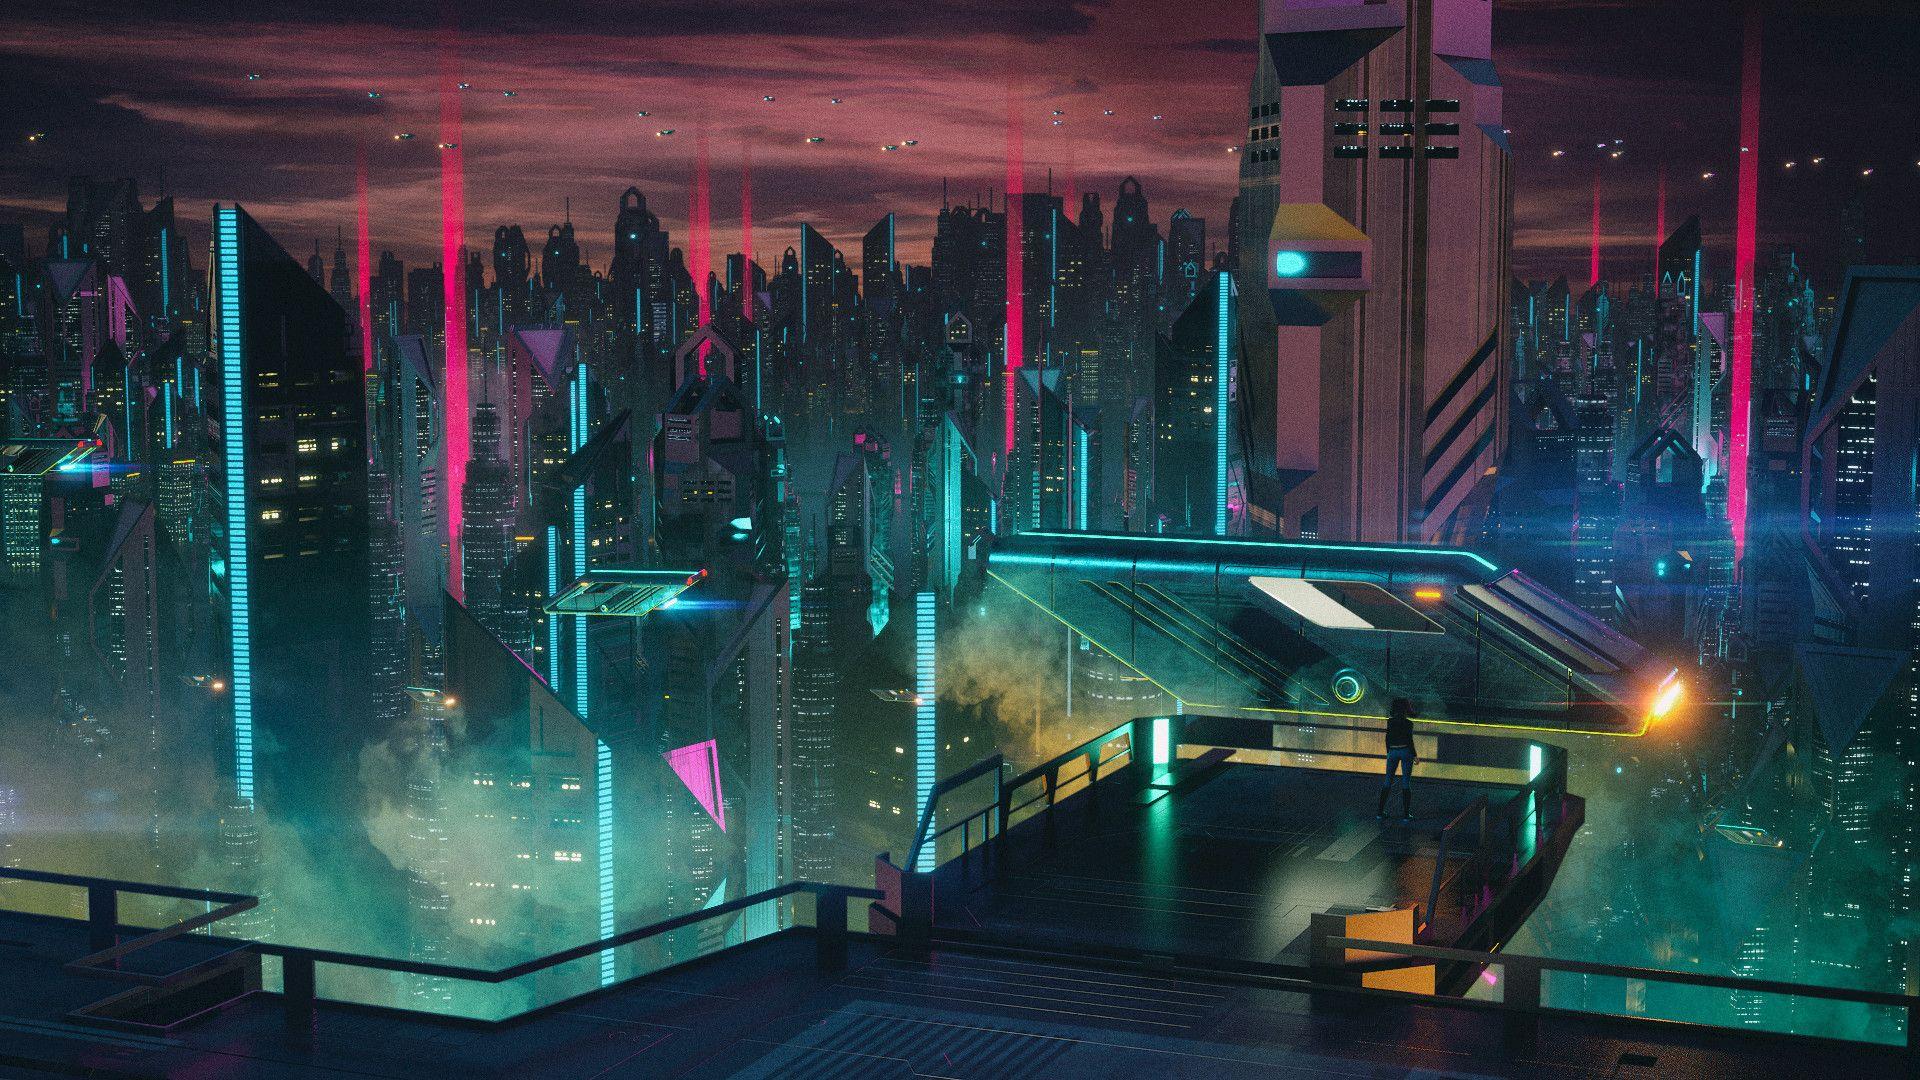 Futuristic City At Night Wallpapers - Wallpaper Cave